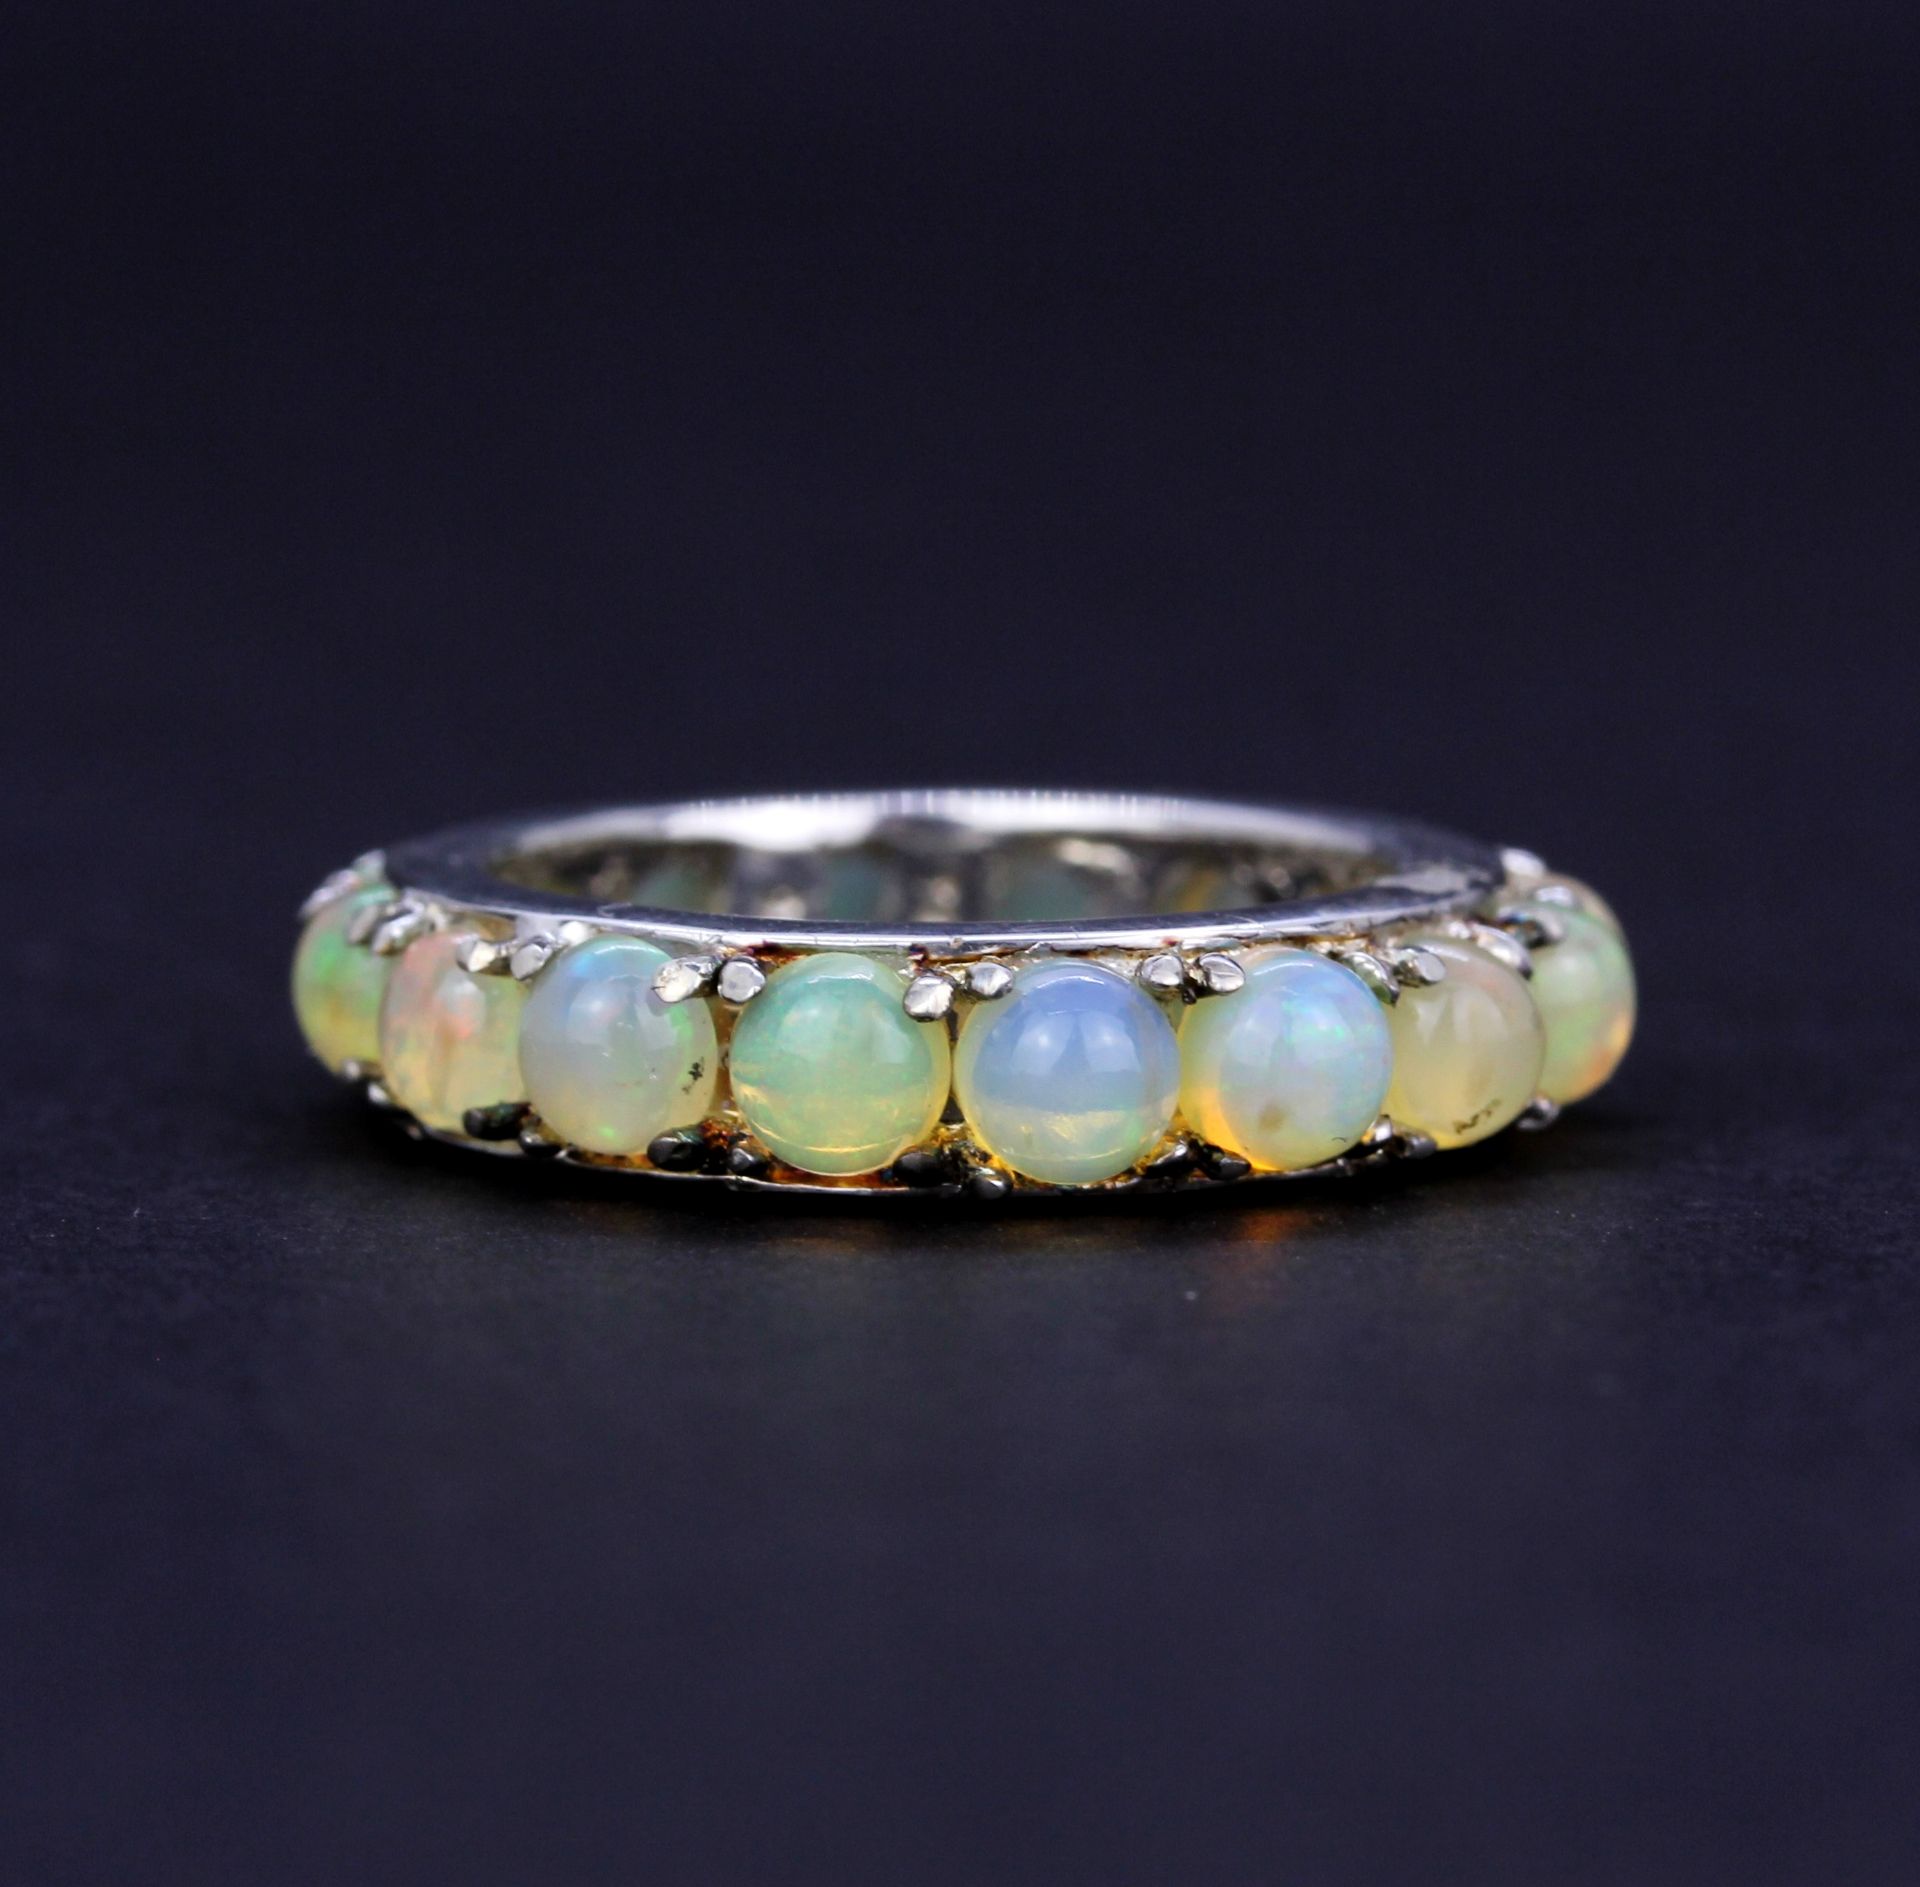 A 925 silver eternity ring set with round cabochon opals, approx. 2.97ct total, (N). With